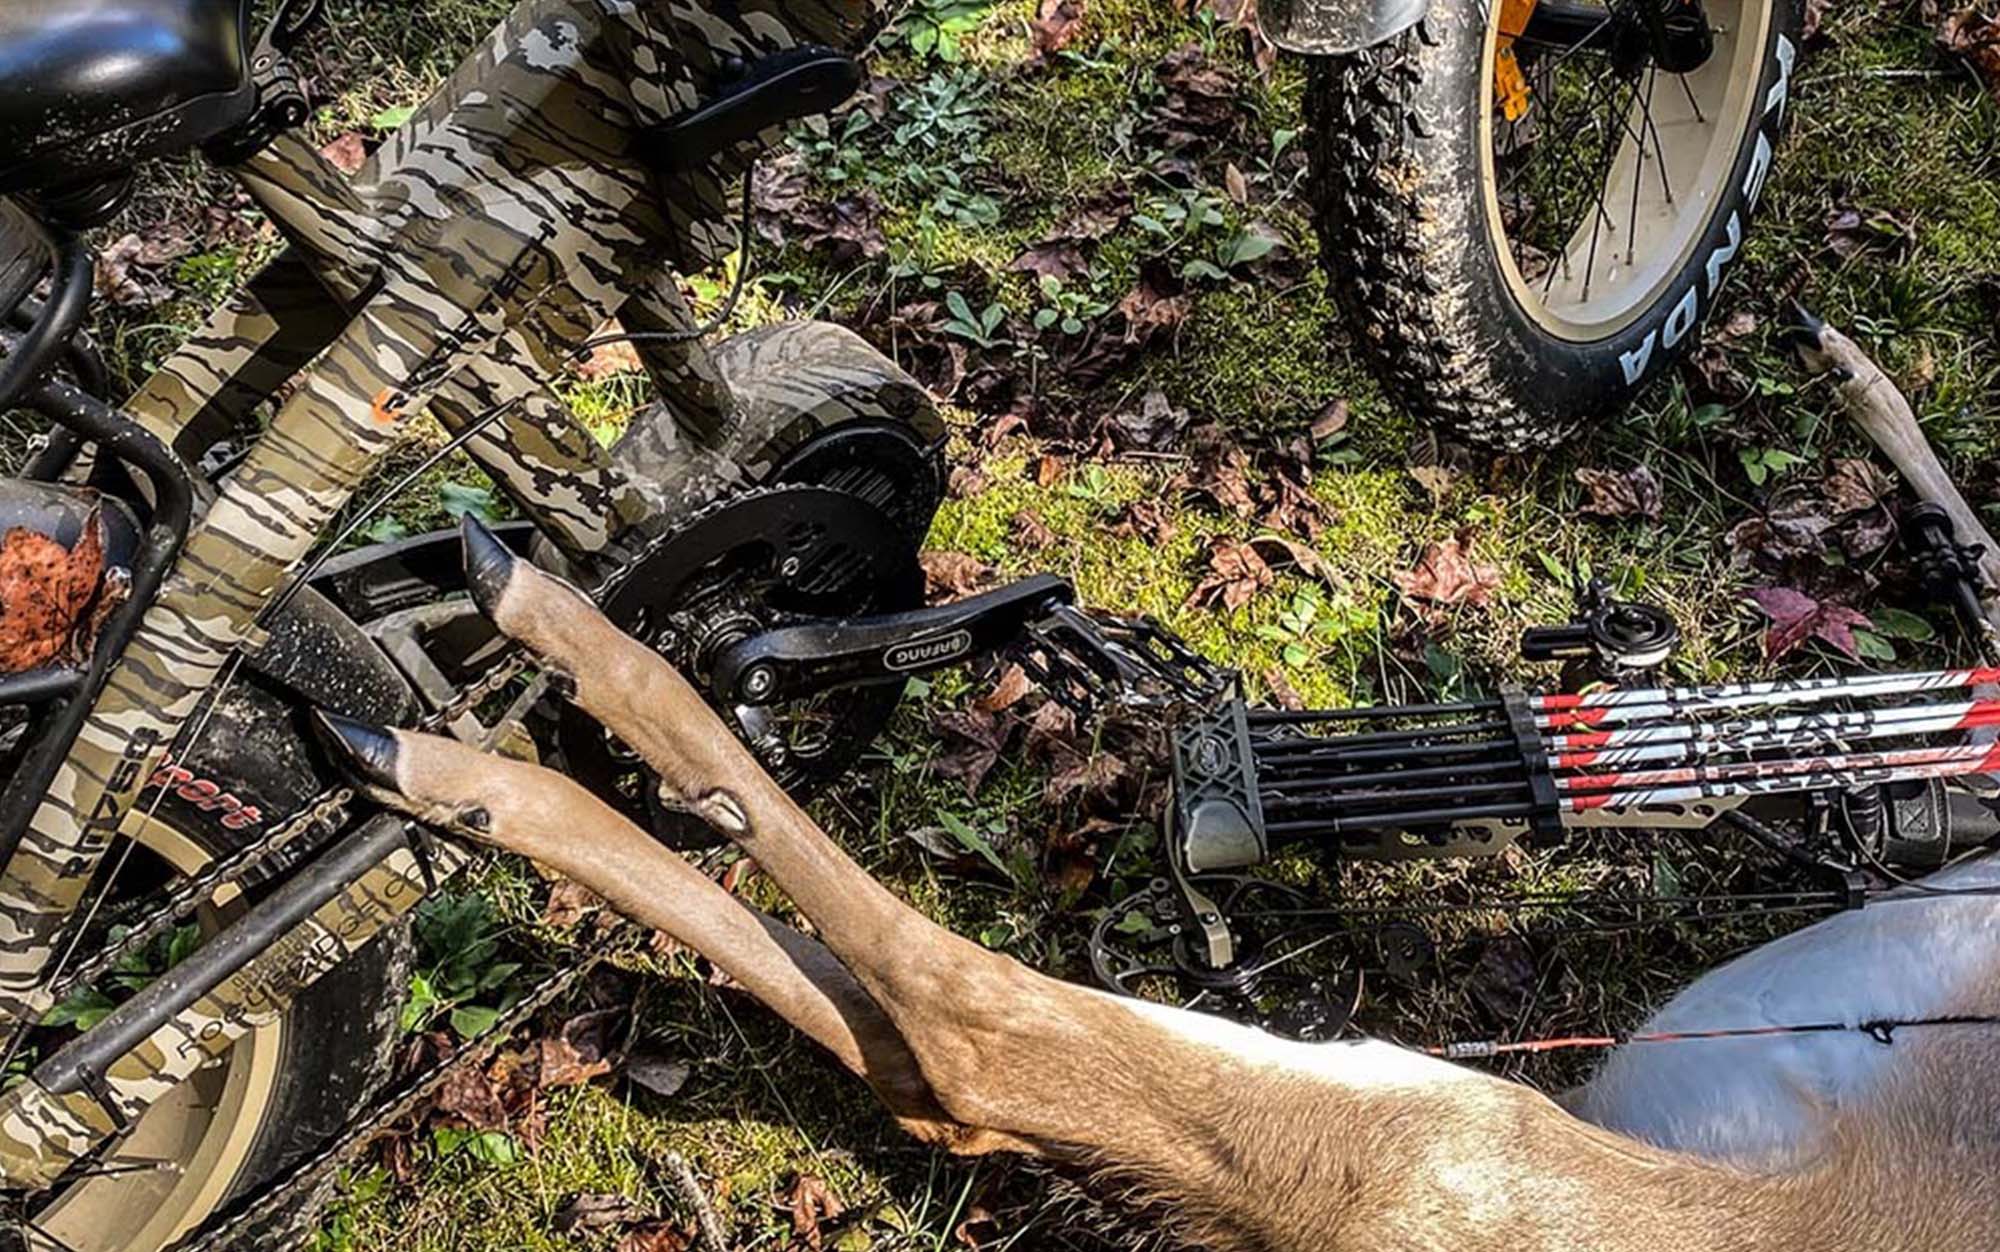 A hunting ebike next to a downed deer.